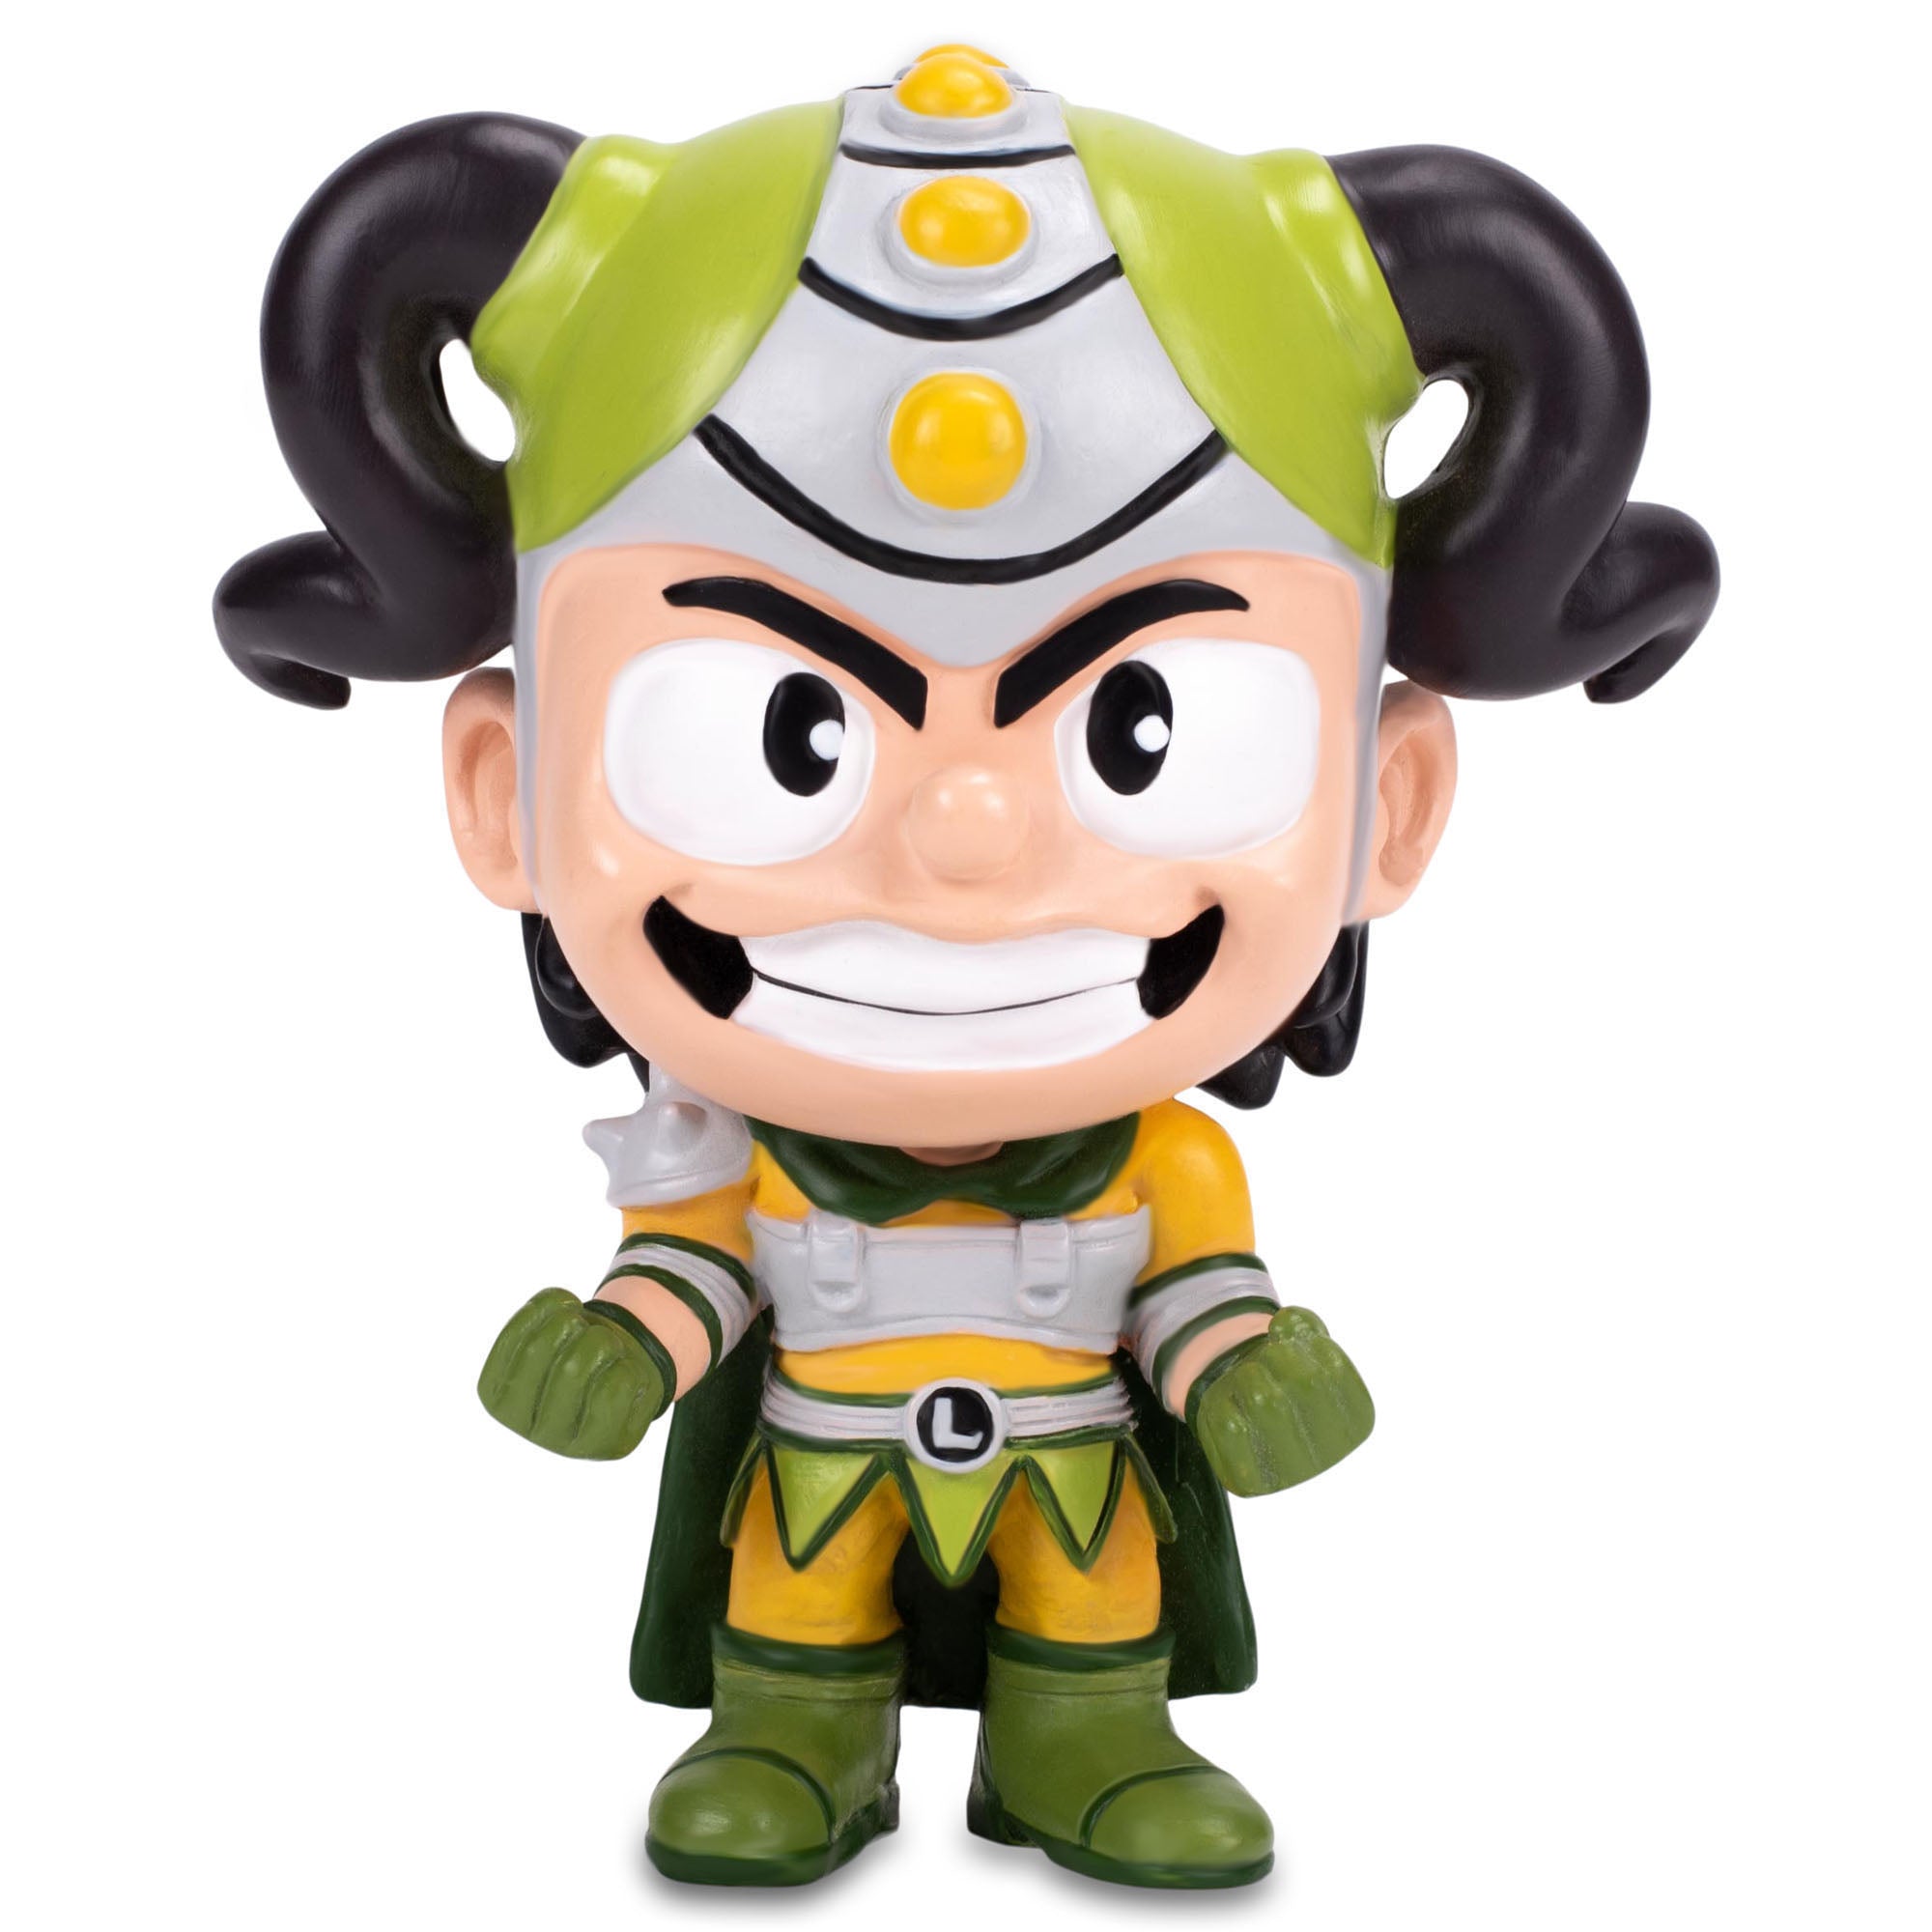 Front angle of Norse folk lore character, Loki, action figure with horned lemon lime helmet and a manic grin